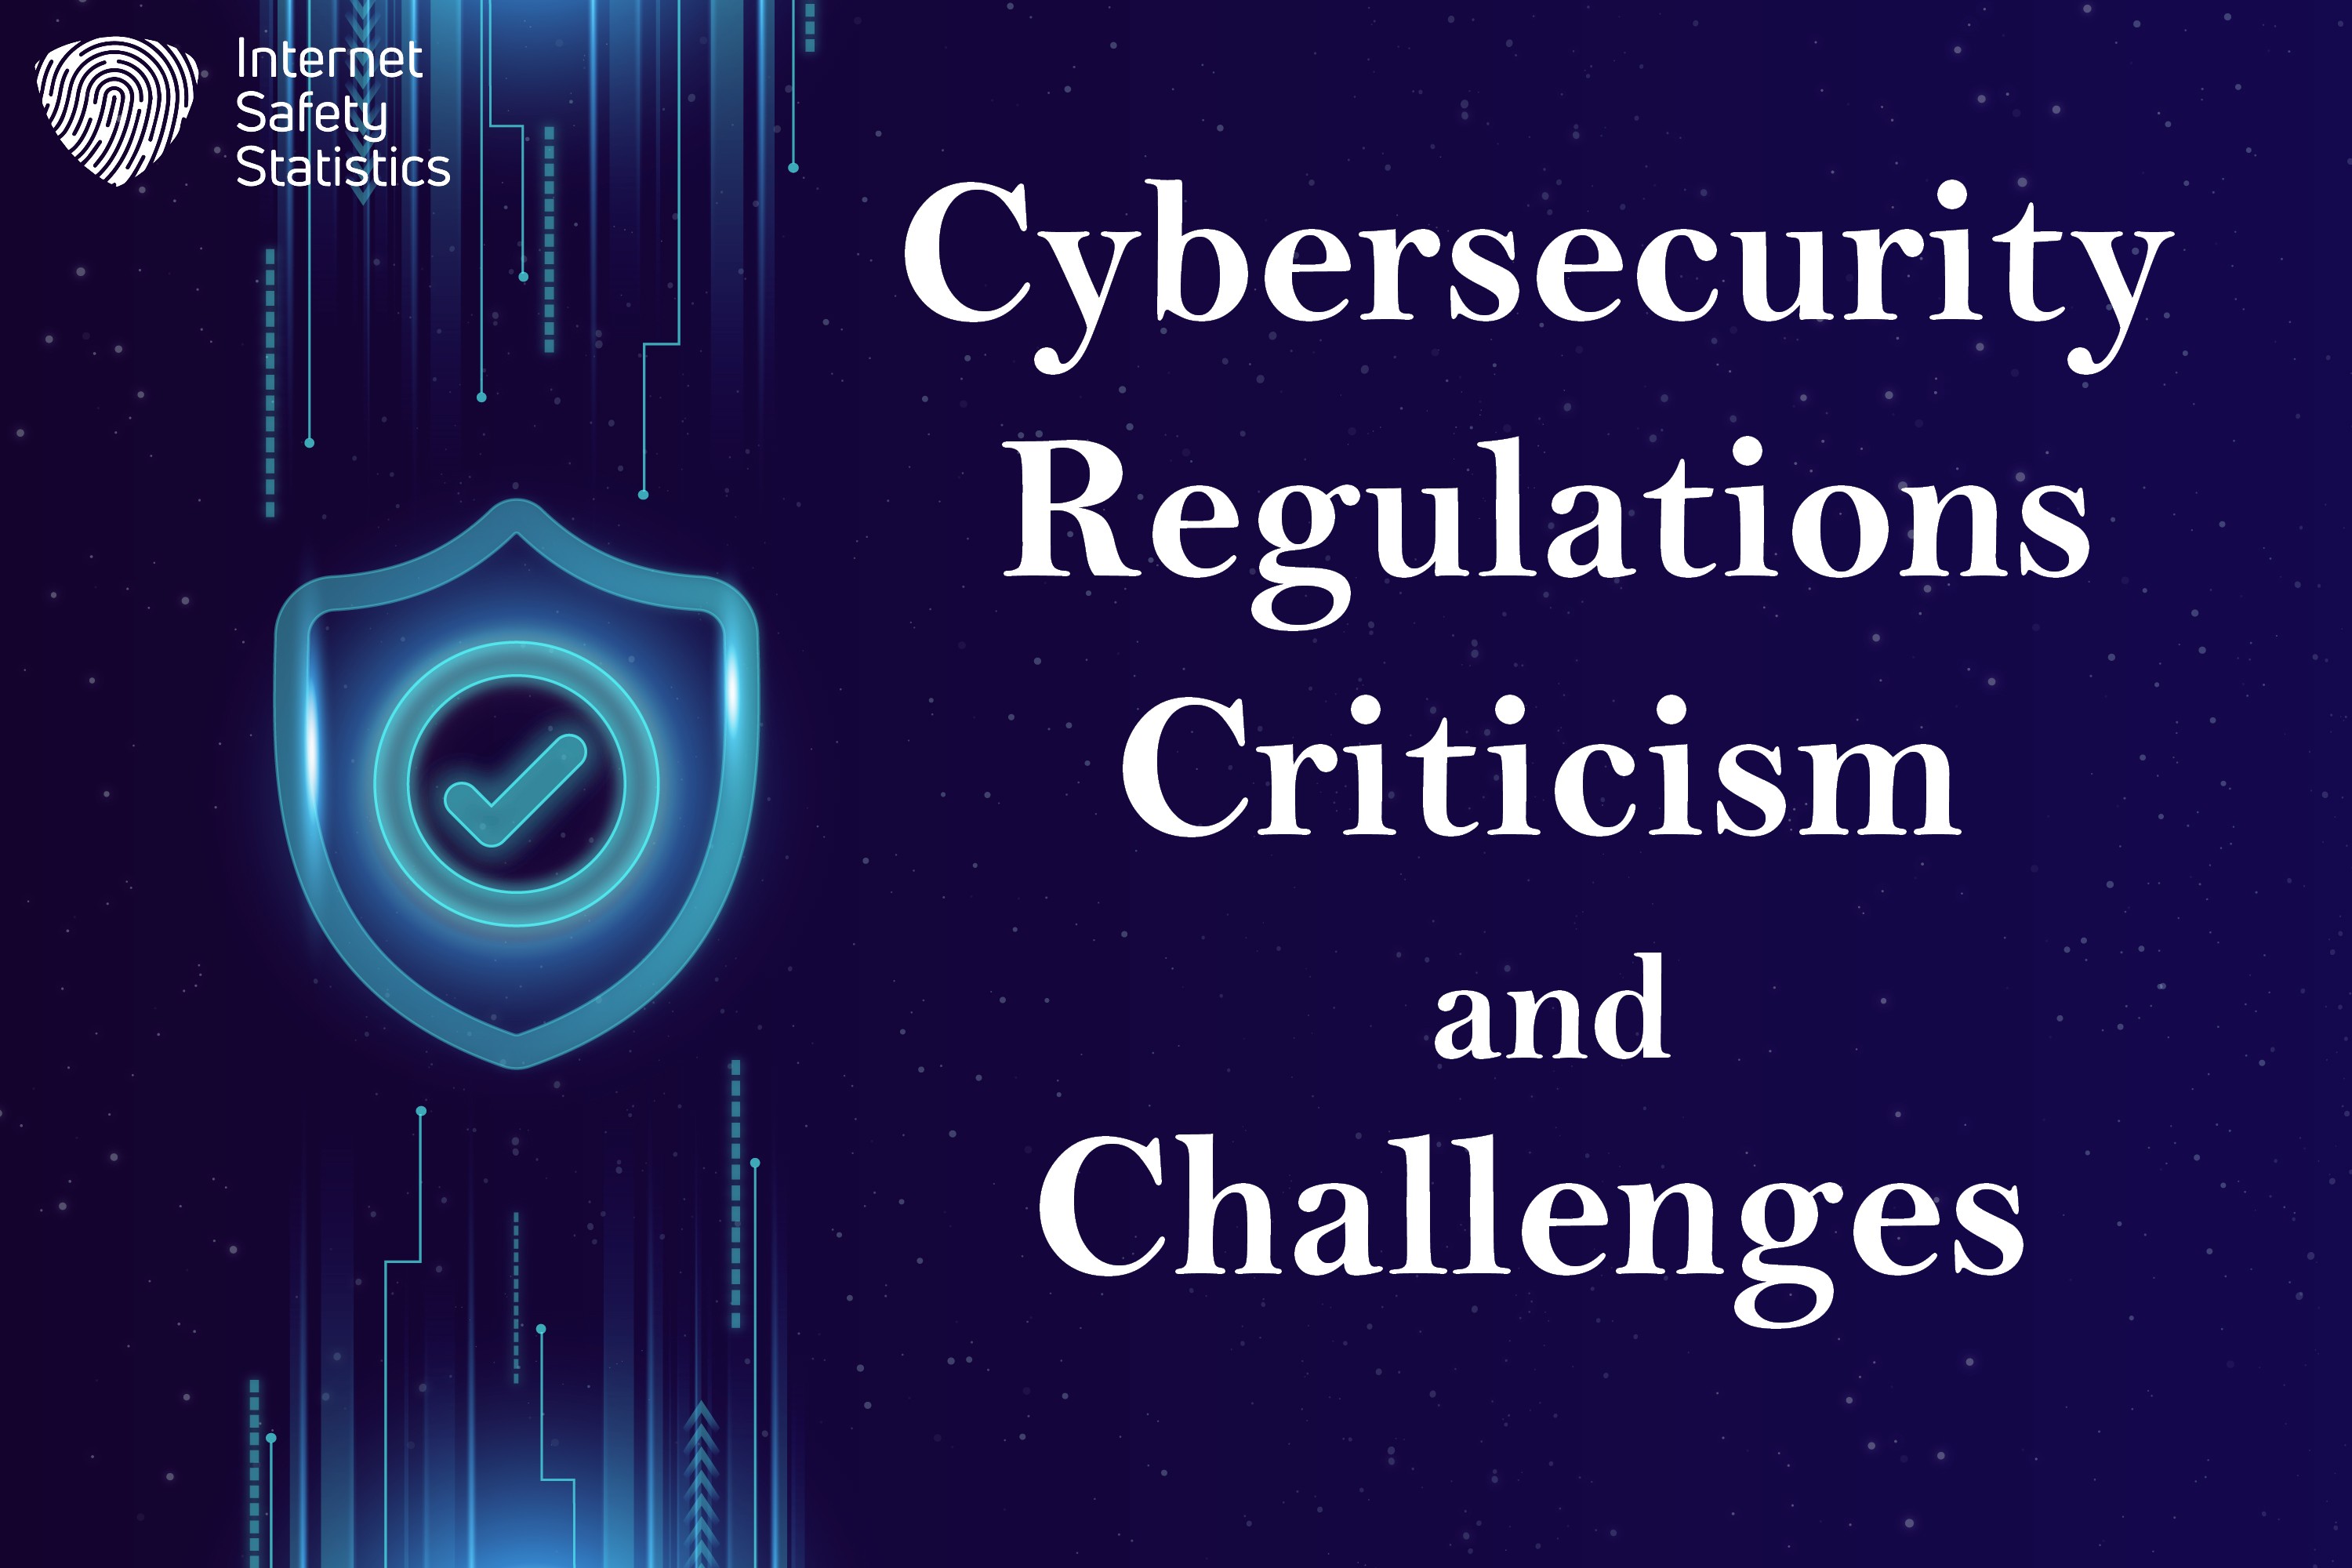 Cybersecurity Regulations- Criticism and Challenges